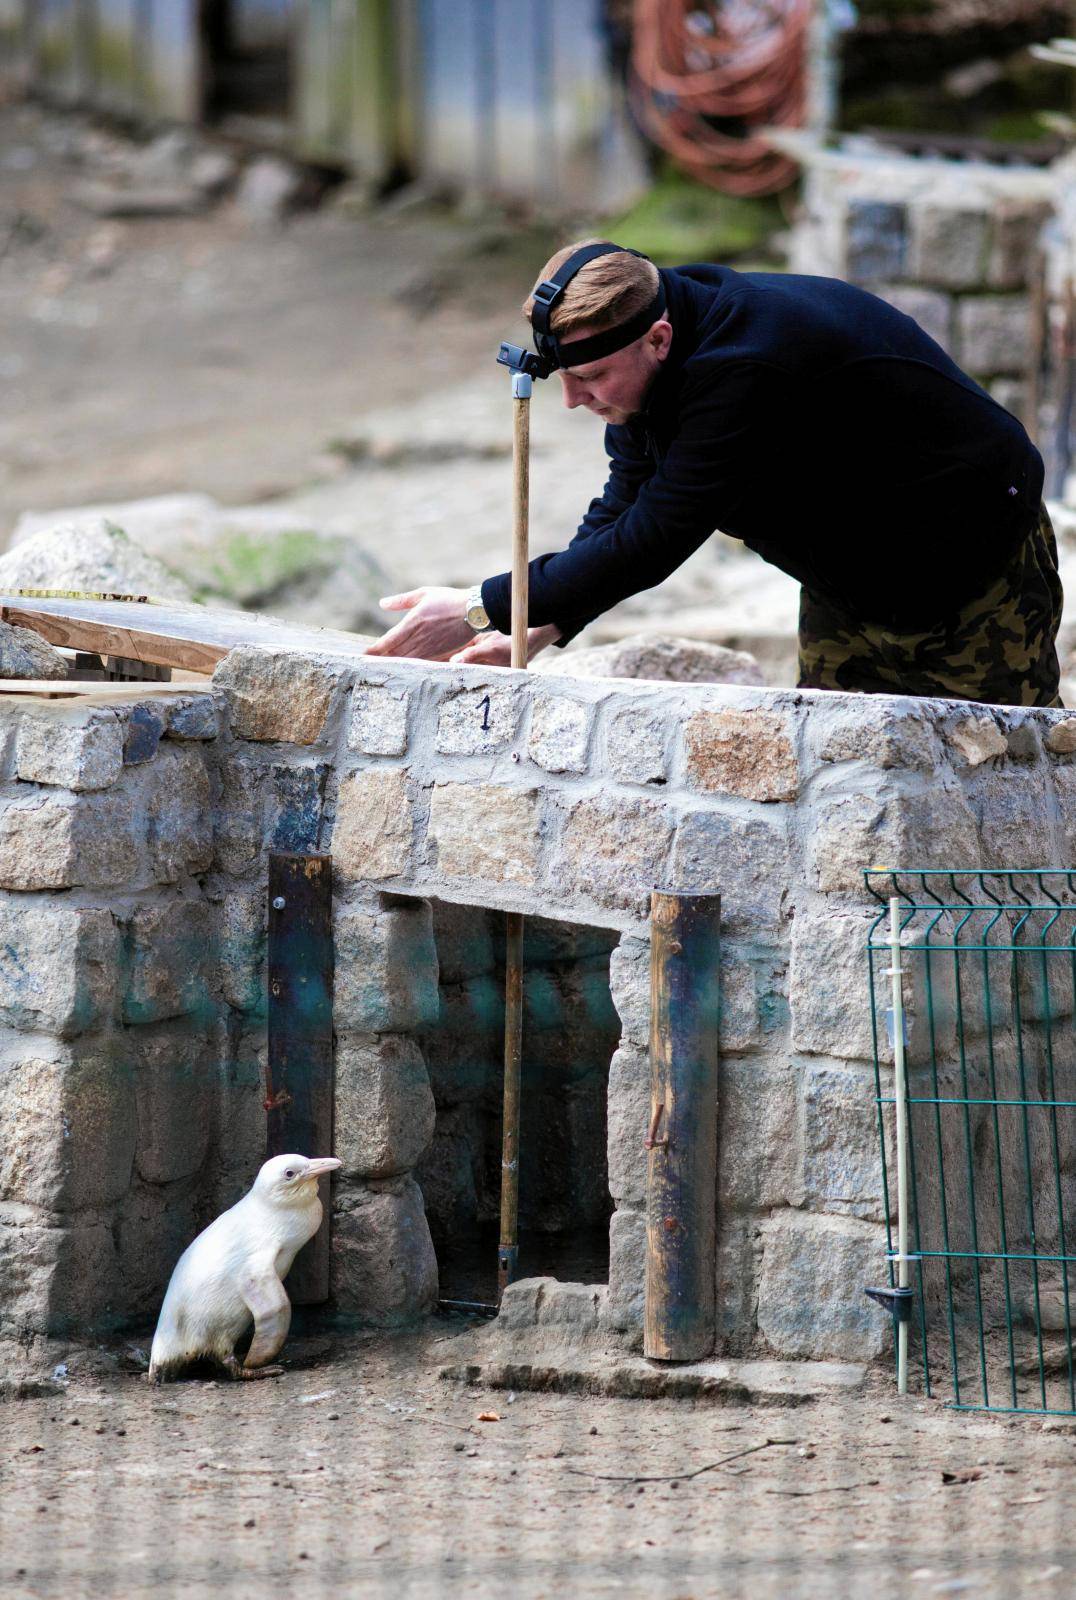 A juvenile albino penguin is presented to the public for the first time at the Gdansk Zoo in Gdansk